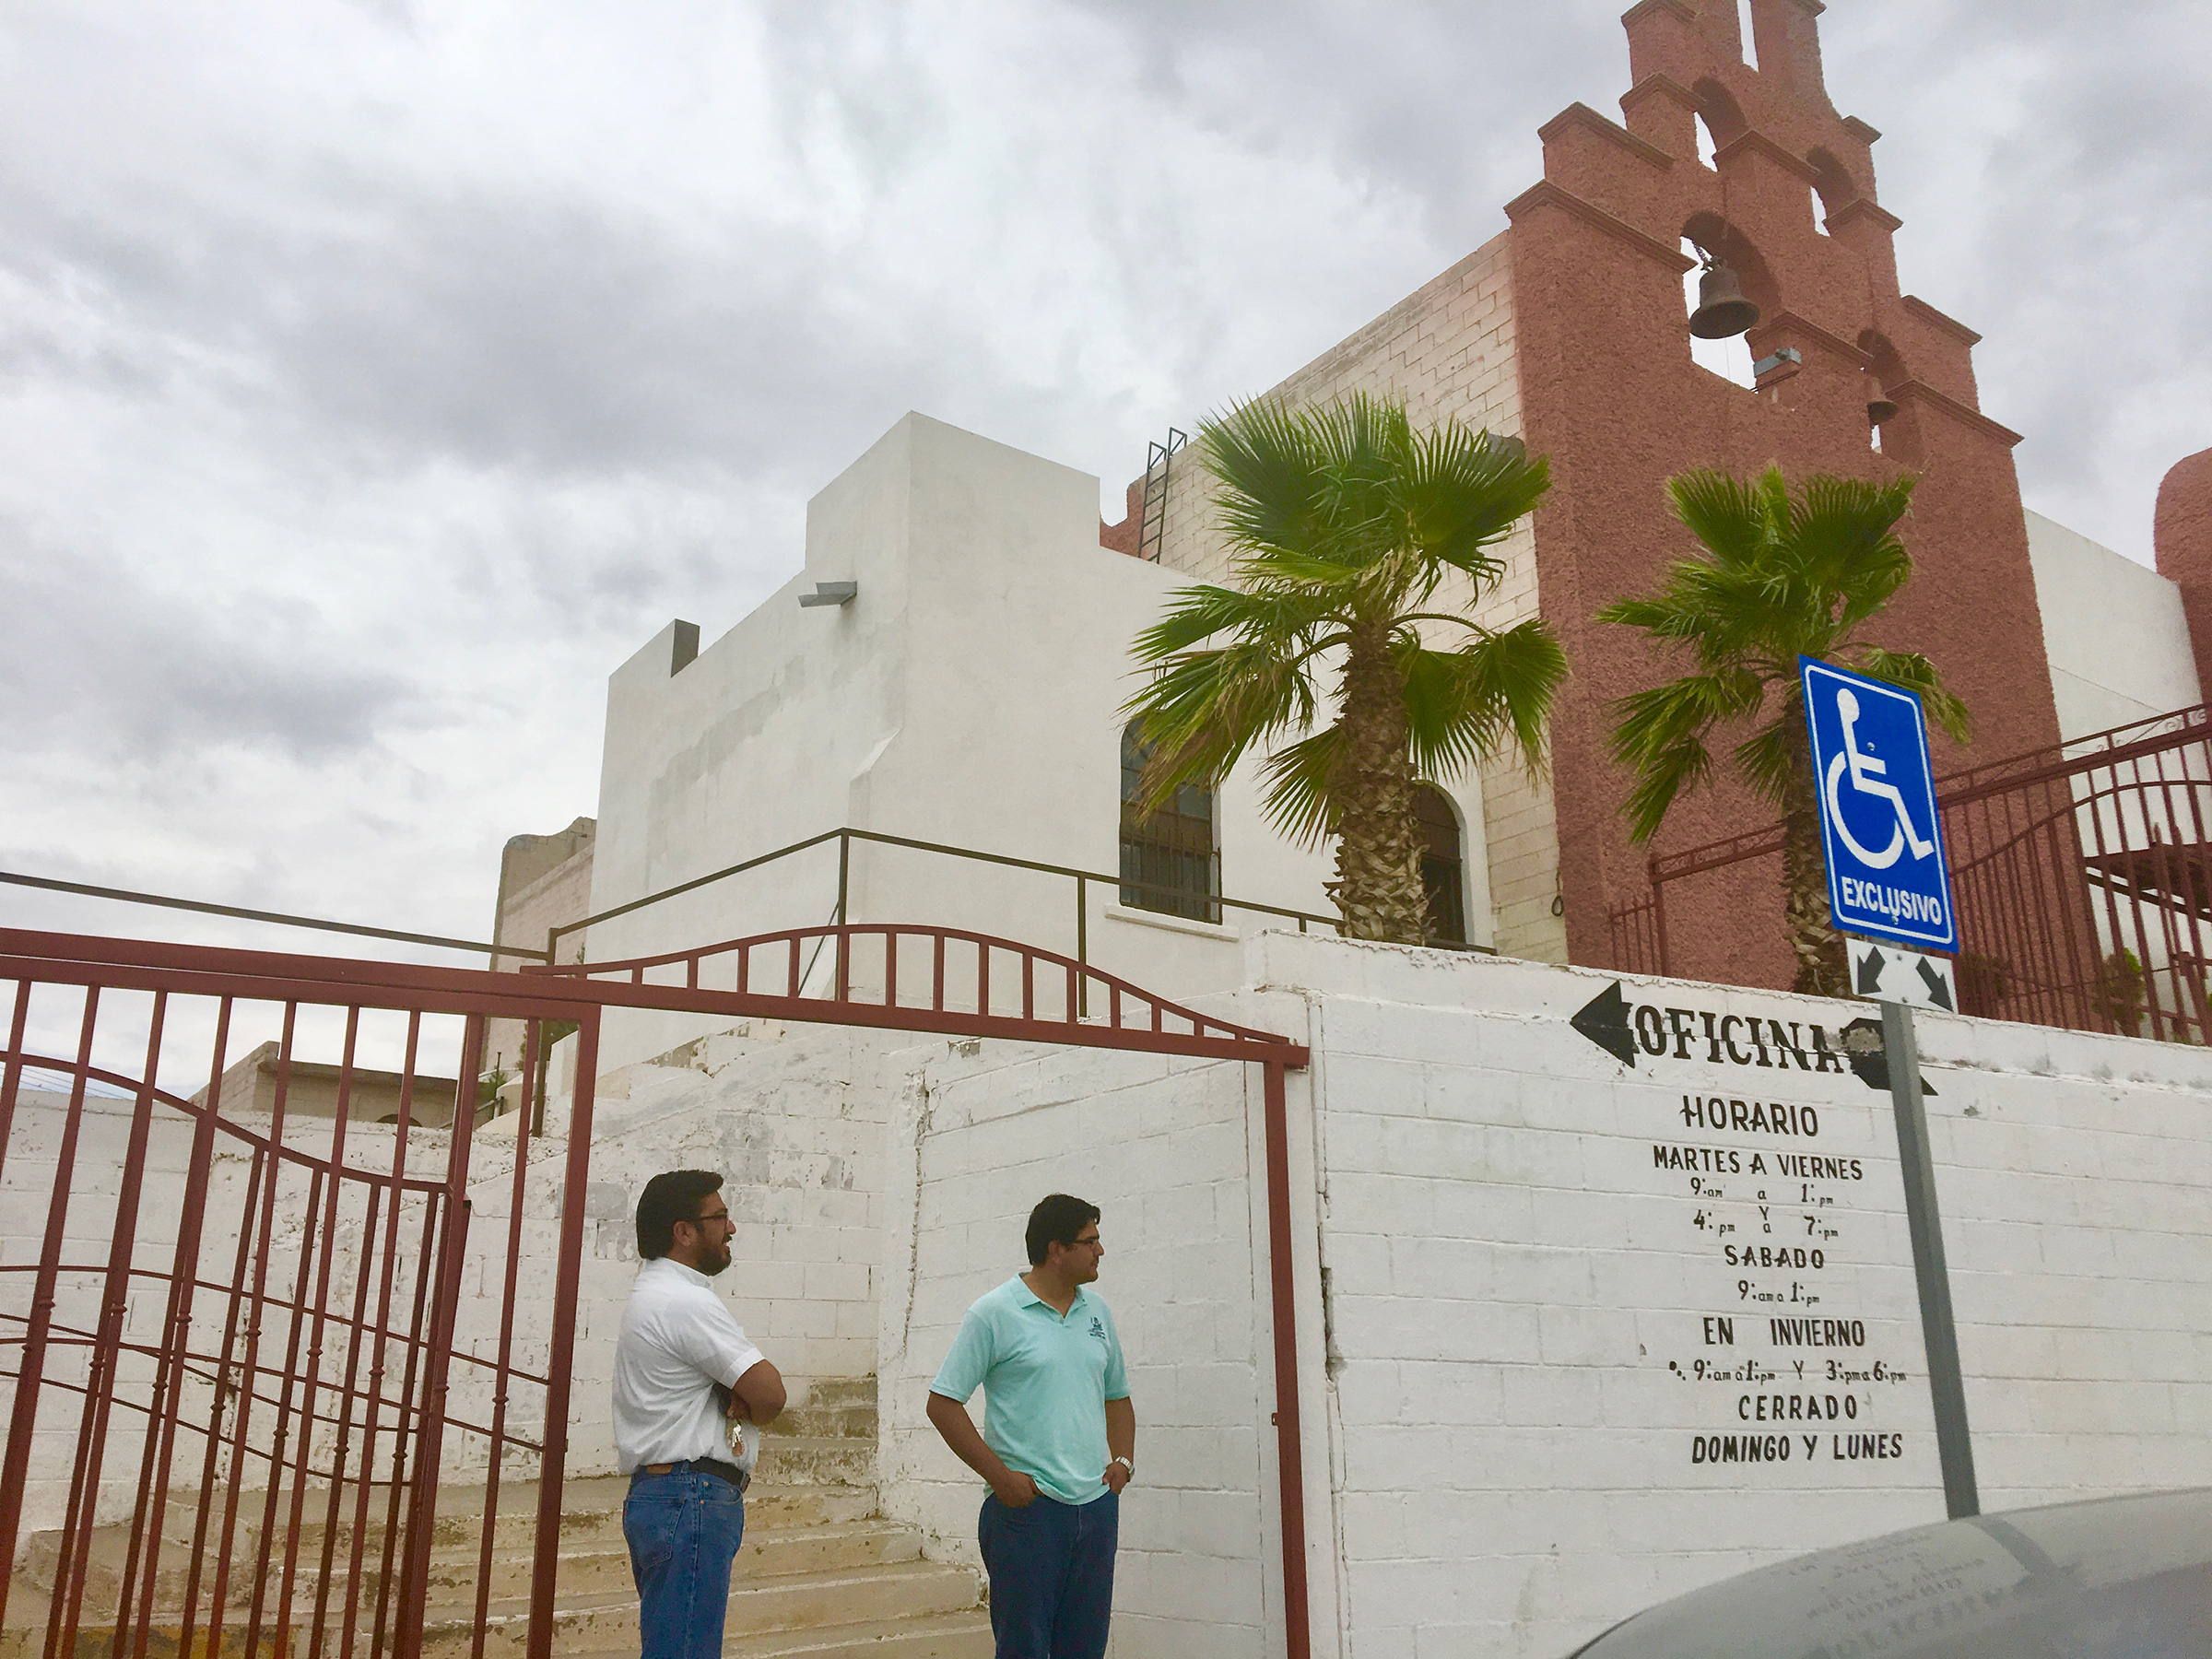 San Juan Apostol Evangelista church, where Sister Maria Antonia Aranda works, doubles as a migrant shelter in Juárez, see here in August 2019. (Courtesy of Lily Moore-Eissenberg)